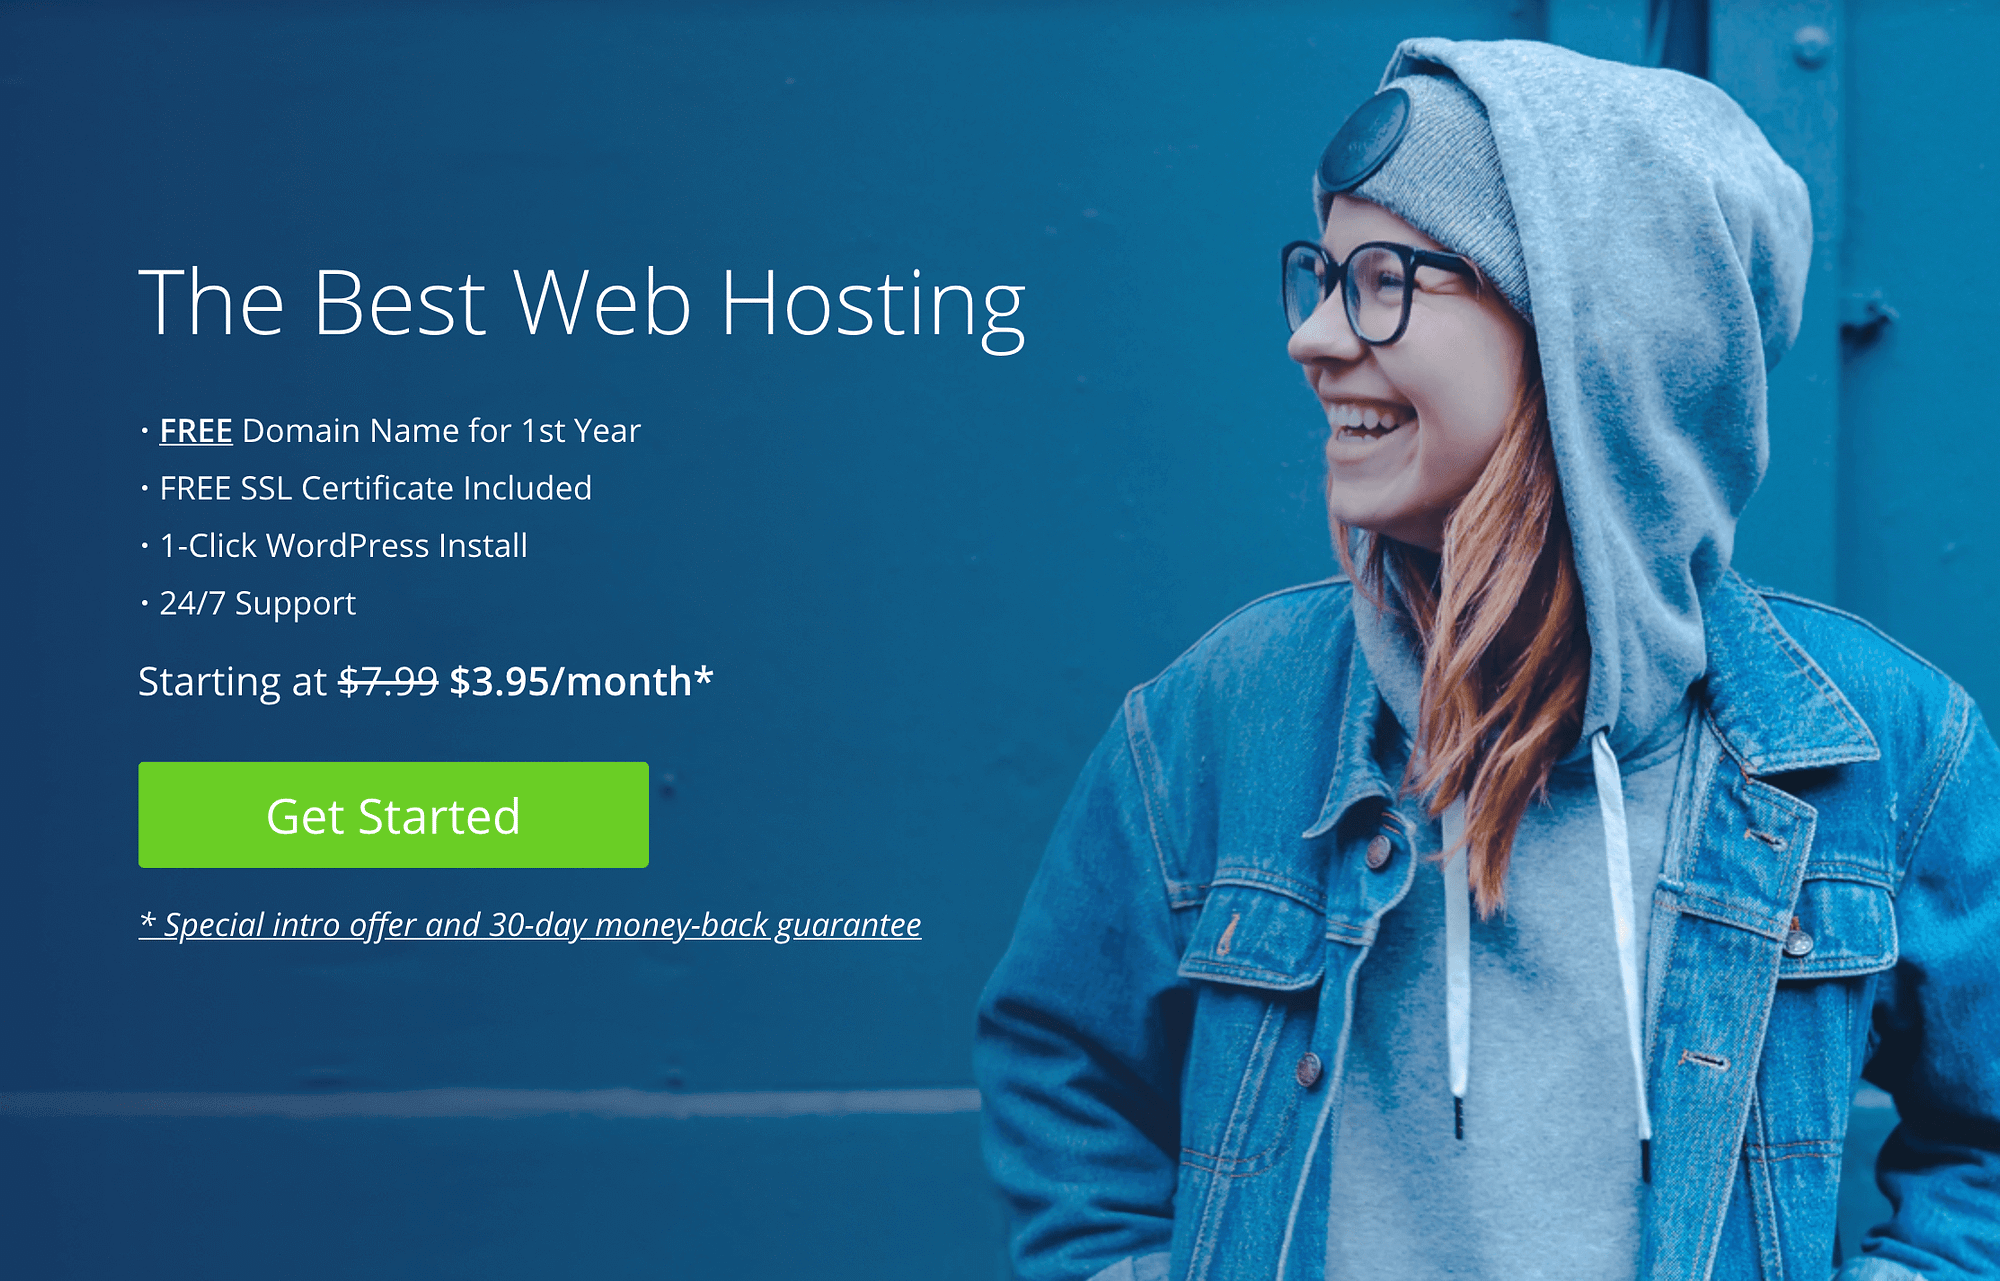 The Bluehost Homepage.